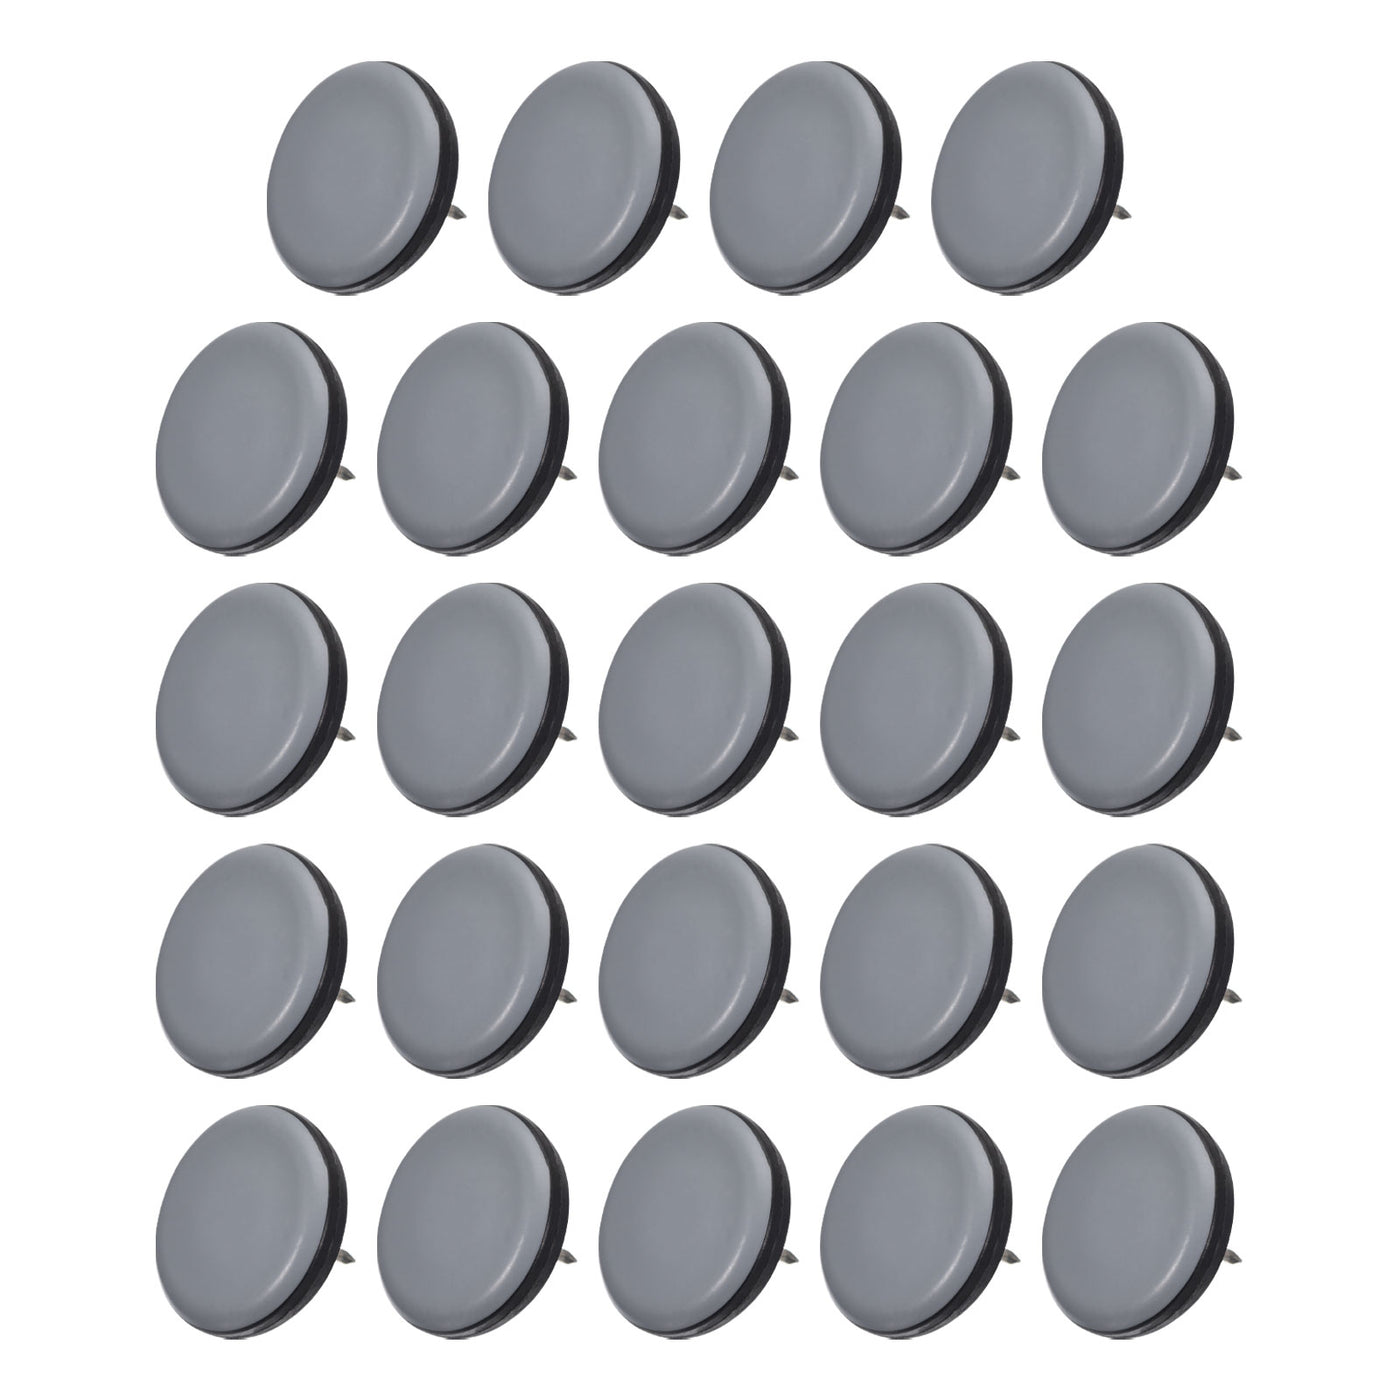 uxcell Uxcell Chair Leg Floor Protectors, 24Pcs 30mm/ 1.18-inch PTFE Round Furniture Sliders, Nail-on Furniture Pads, Chair Glides for Carpet Hardwood Floors